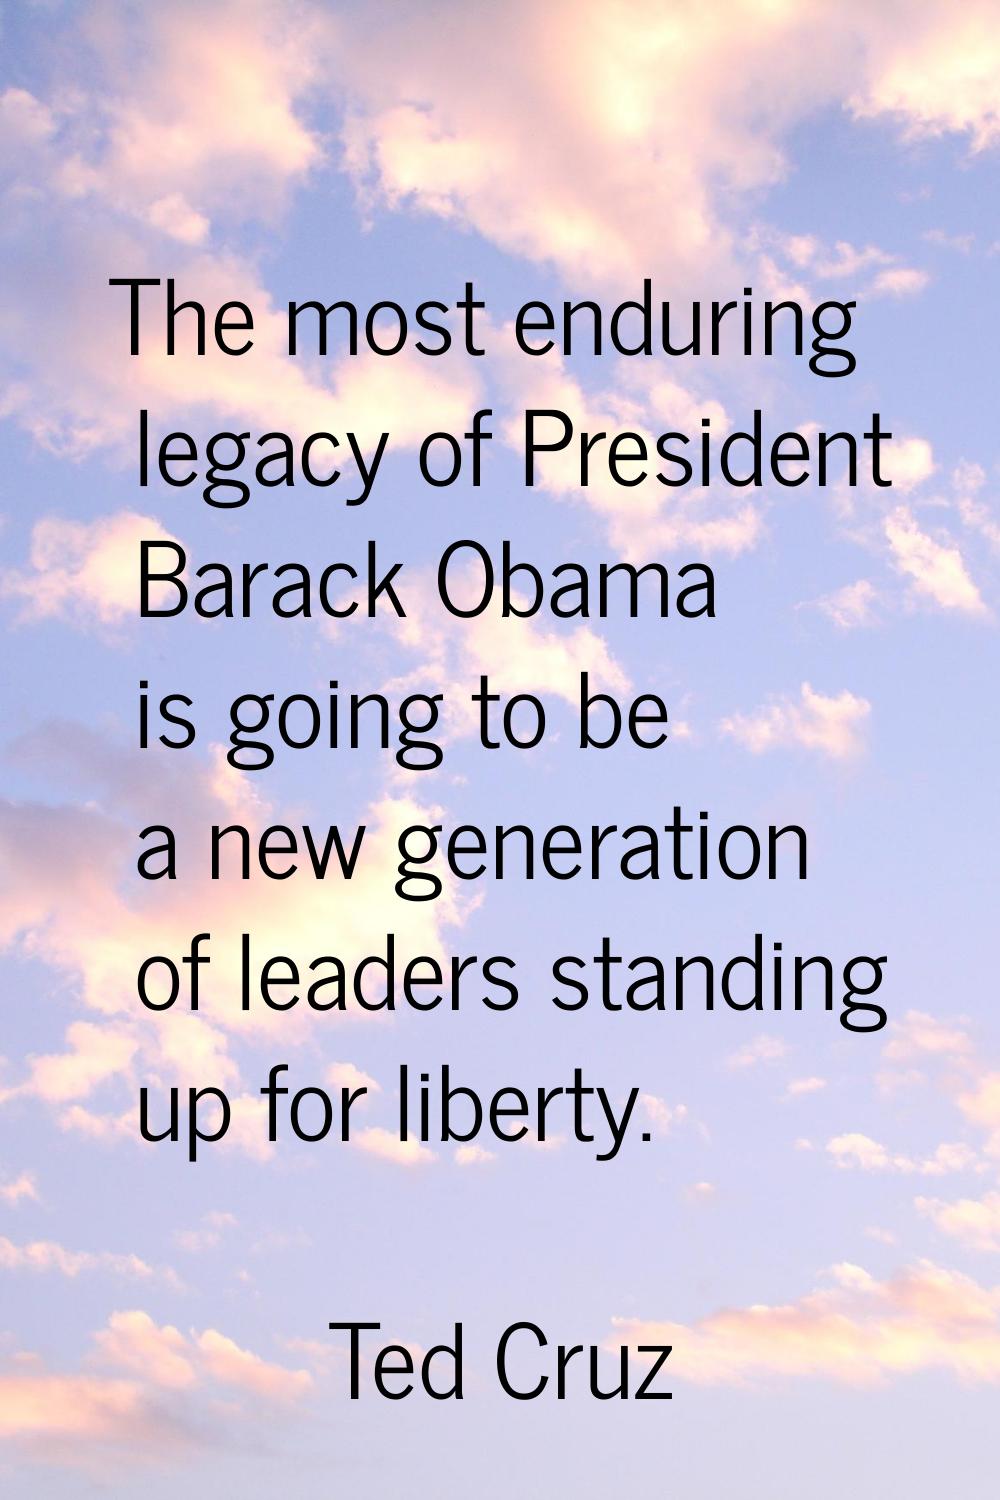 The most enduring legacy of President Barack Obama is going to be a new generation of leaders stand